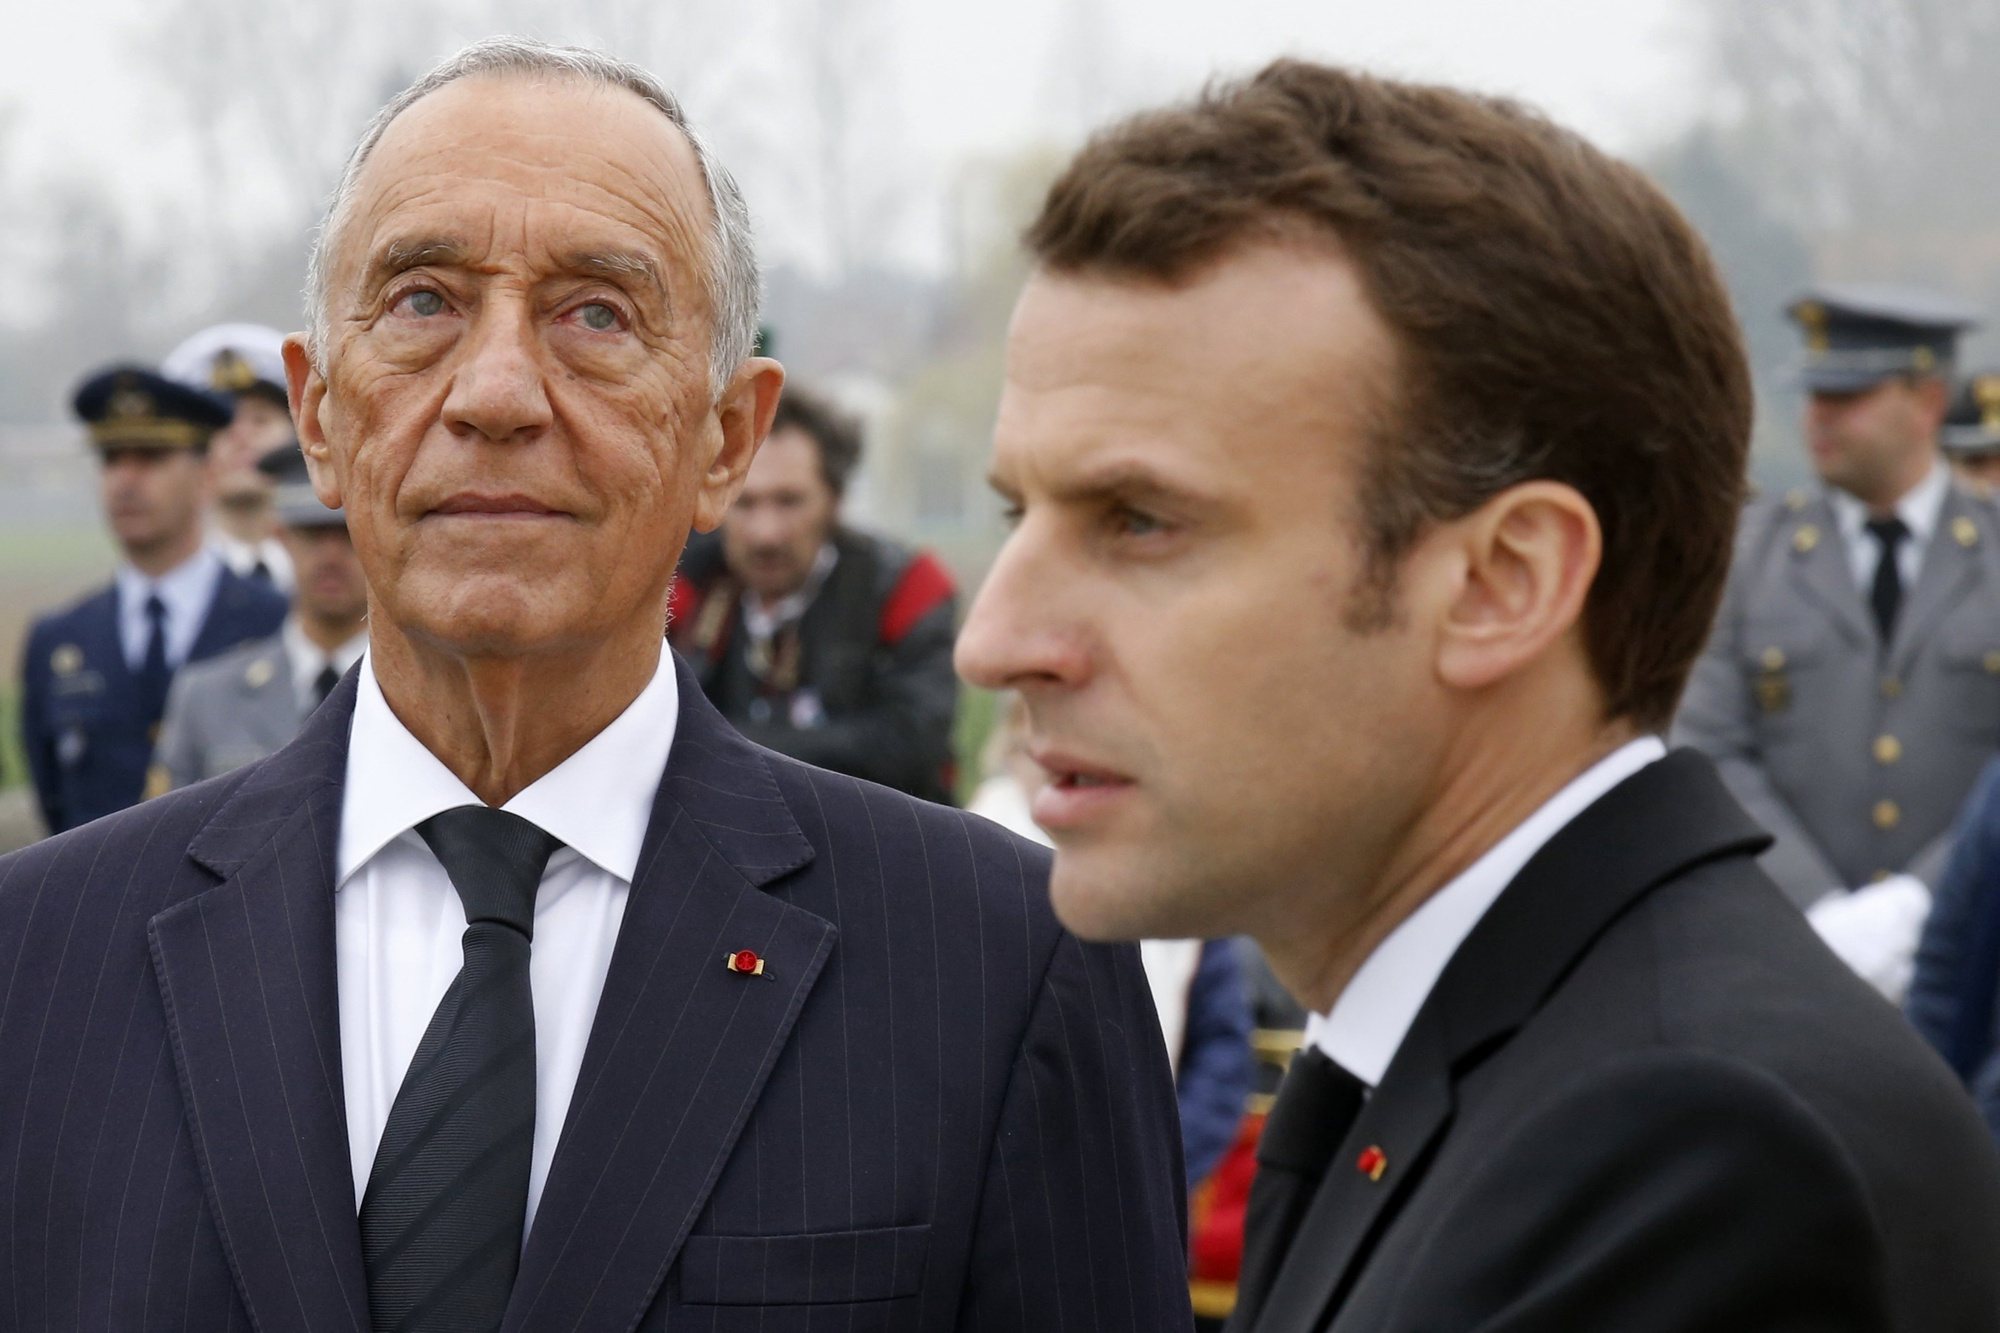 epa06657141 French President Emmanuel Macron (R) and Portuguese President Marcelo Rebelo de Sousa attend a World War One remembrance ceremony of the battle of la Lys at the WW1 Portuguese cemetery in Richebourg, France, 09 April 2018.  EPA/PASCAL ROSSIGNOL / POOL MAXPPP OUT